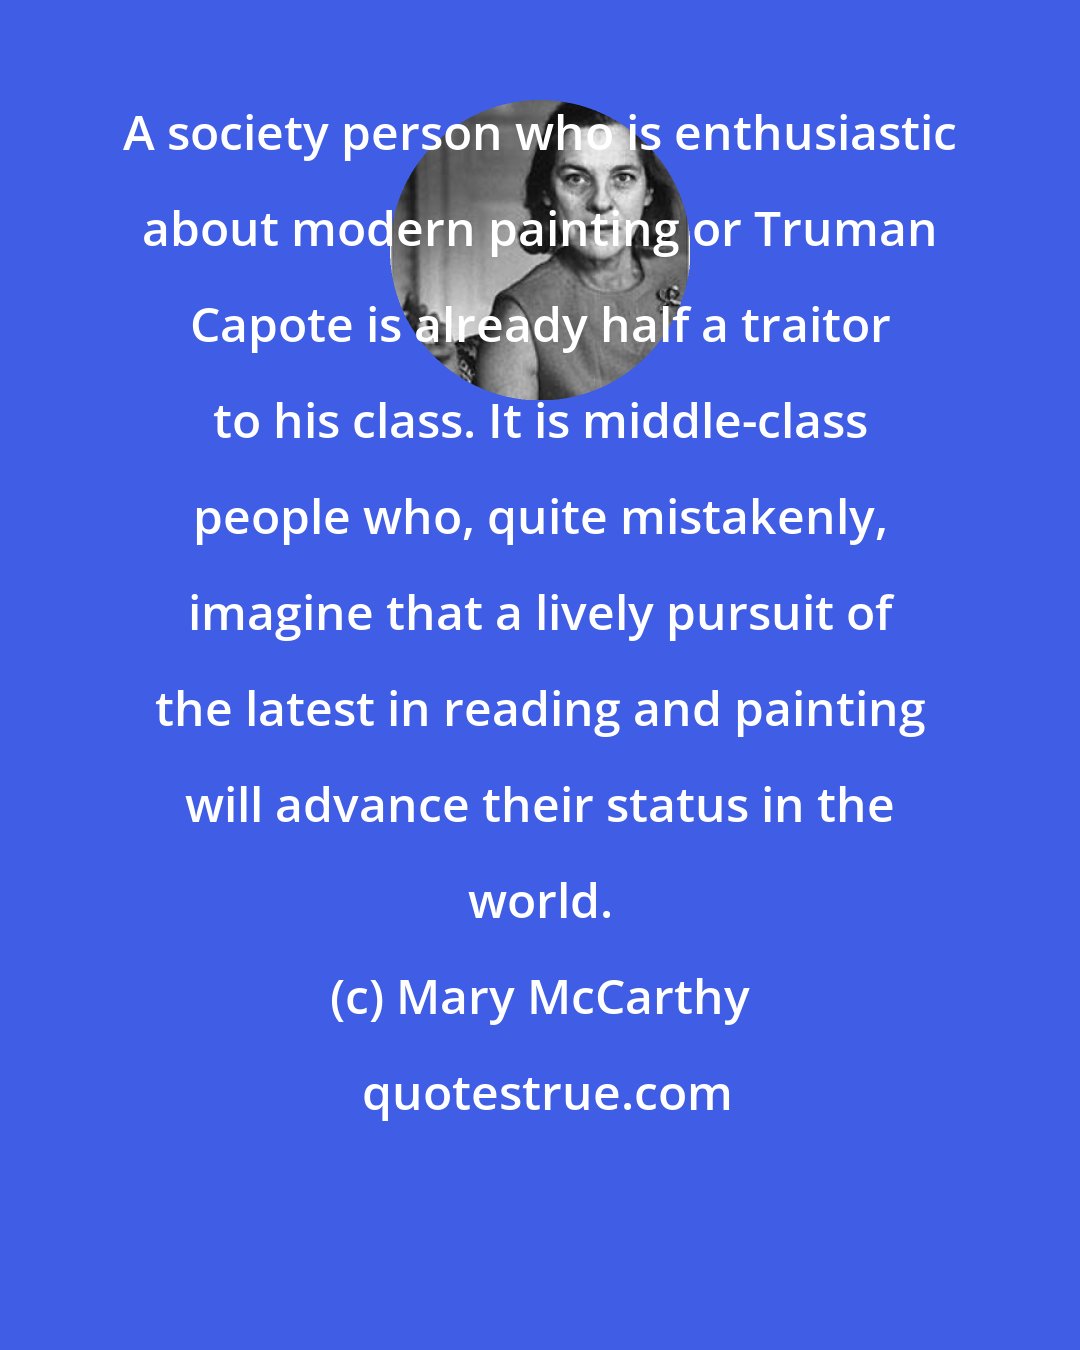 Mary McCarthy: A society person who is enthusiastic about modern painting or Truman Capote is already half a traitor to his class. It is middle-class people who, quite mistakenly, imagine that a lively pursuit of the latest in reading and painting will advance their status in the world.